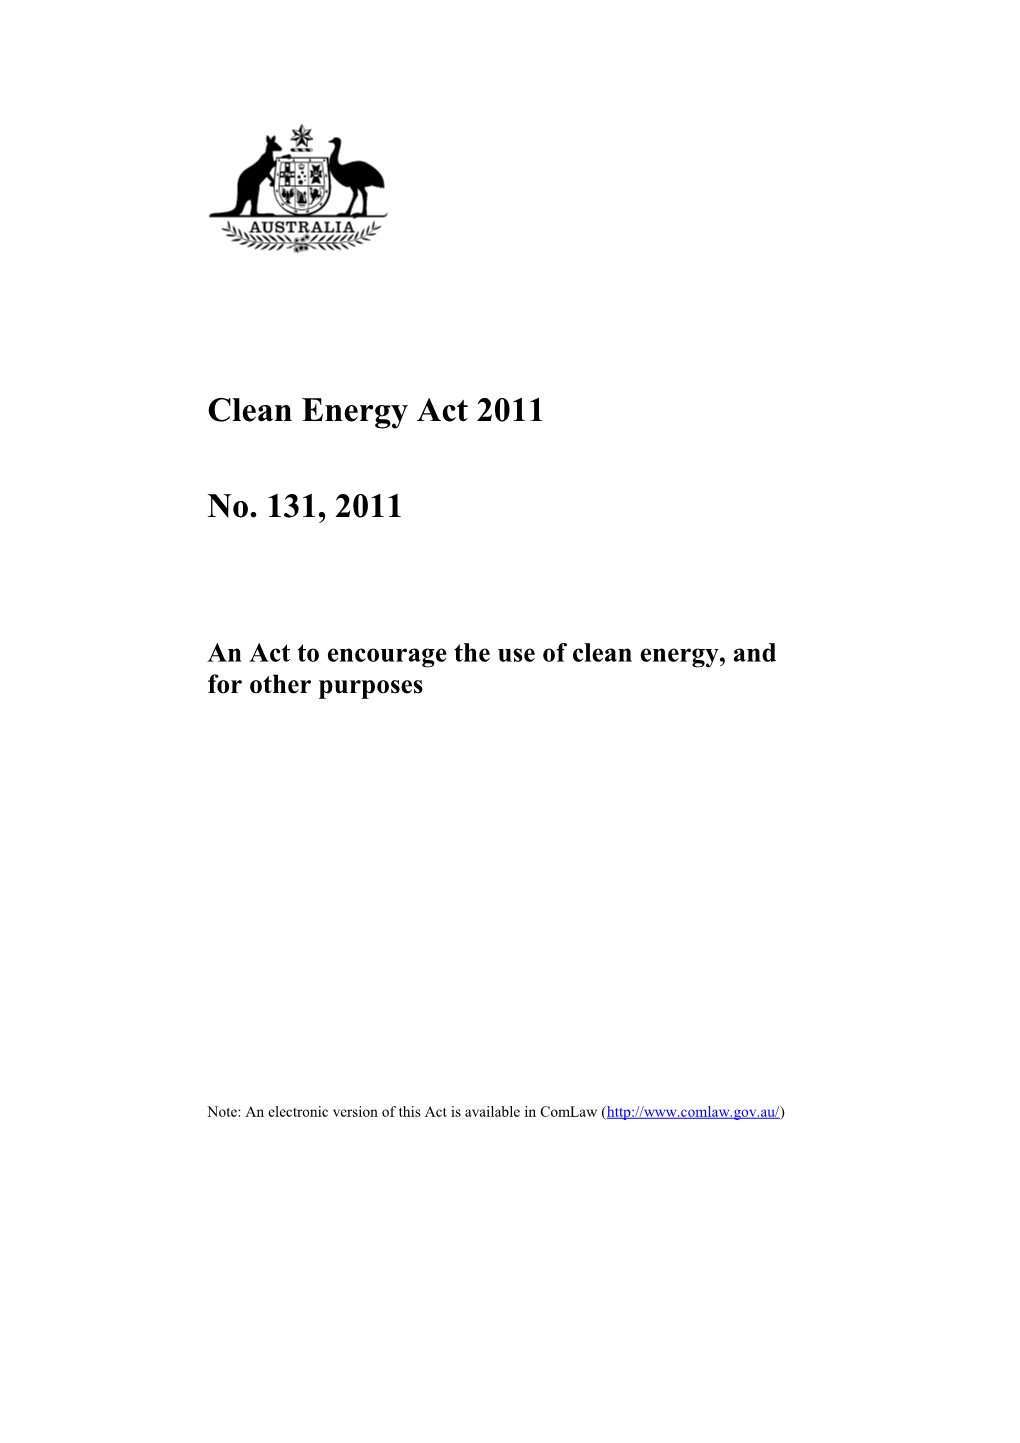 An Act to Encourage the Use of Clean Energy, and for Other Purposes